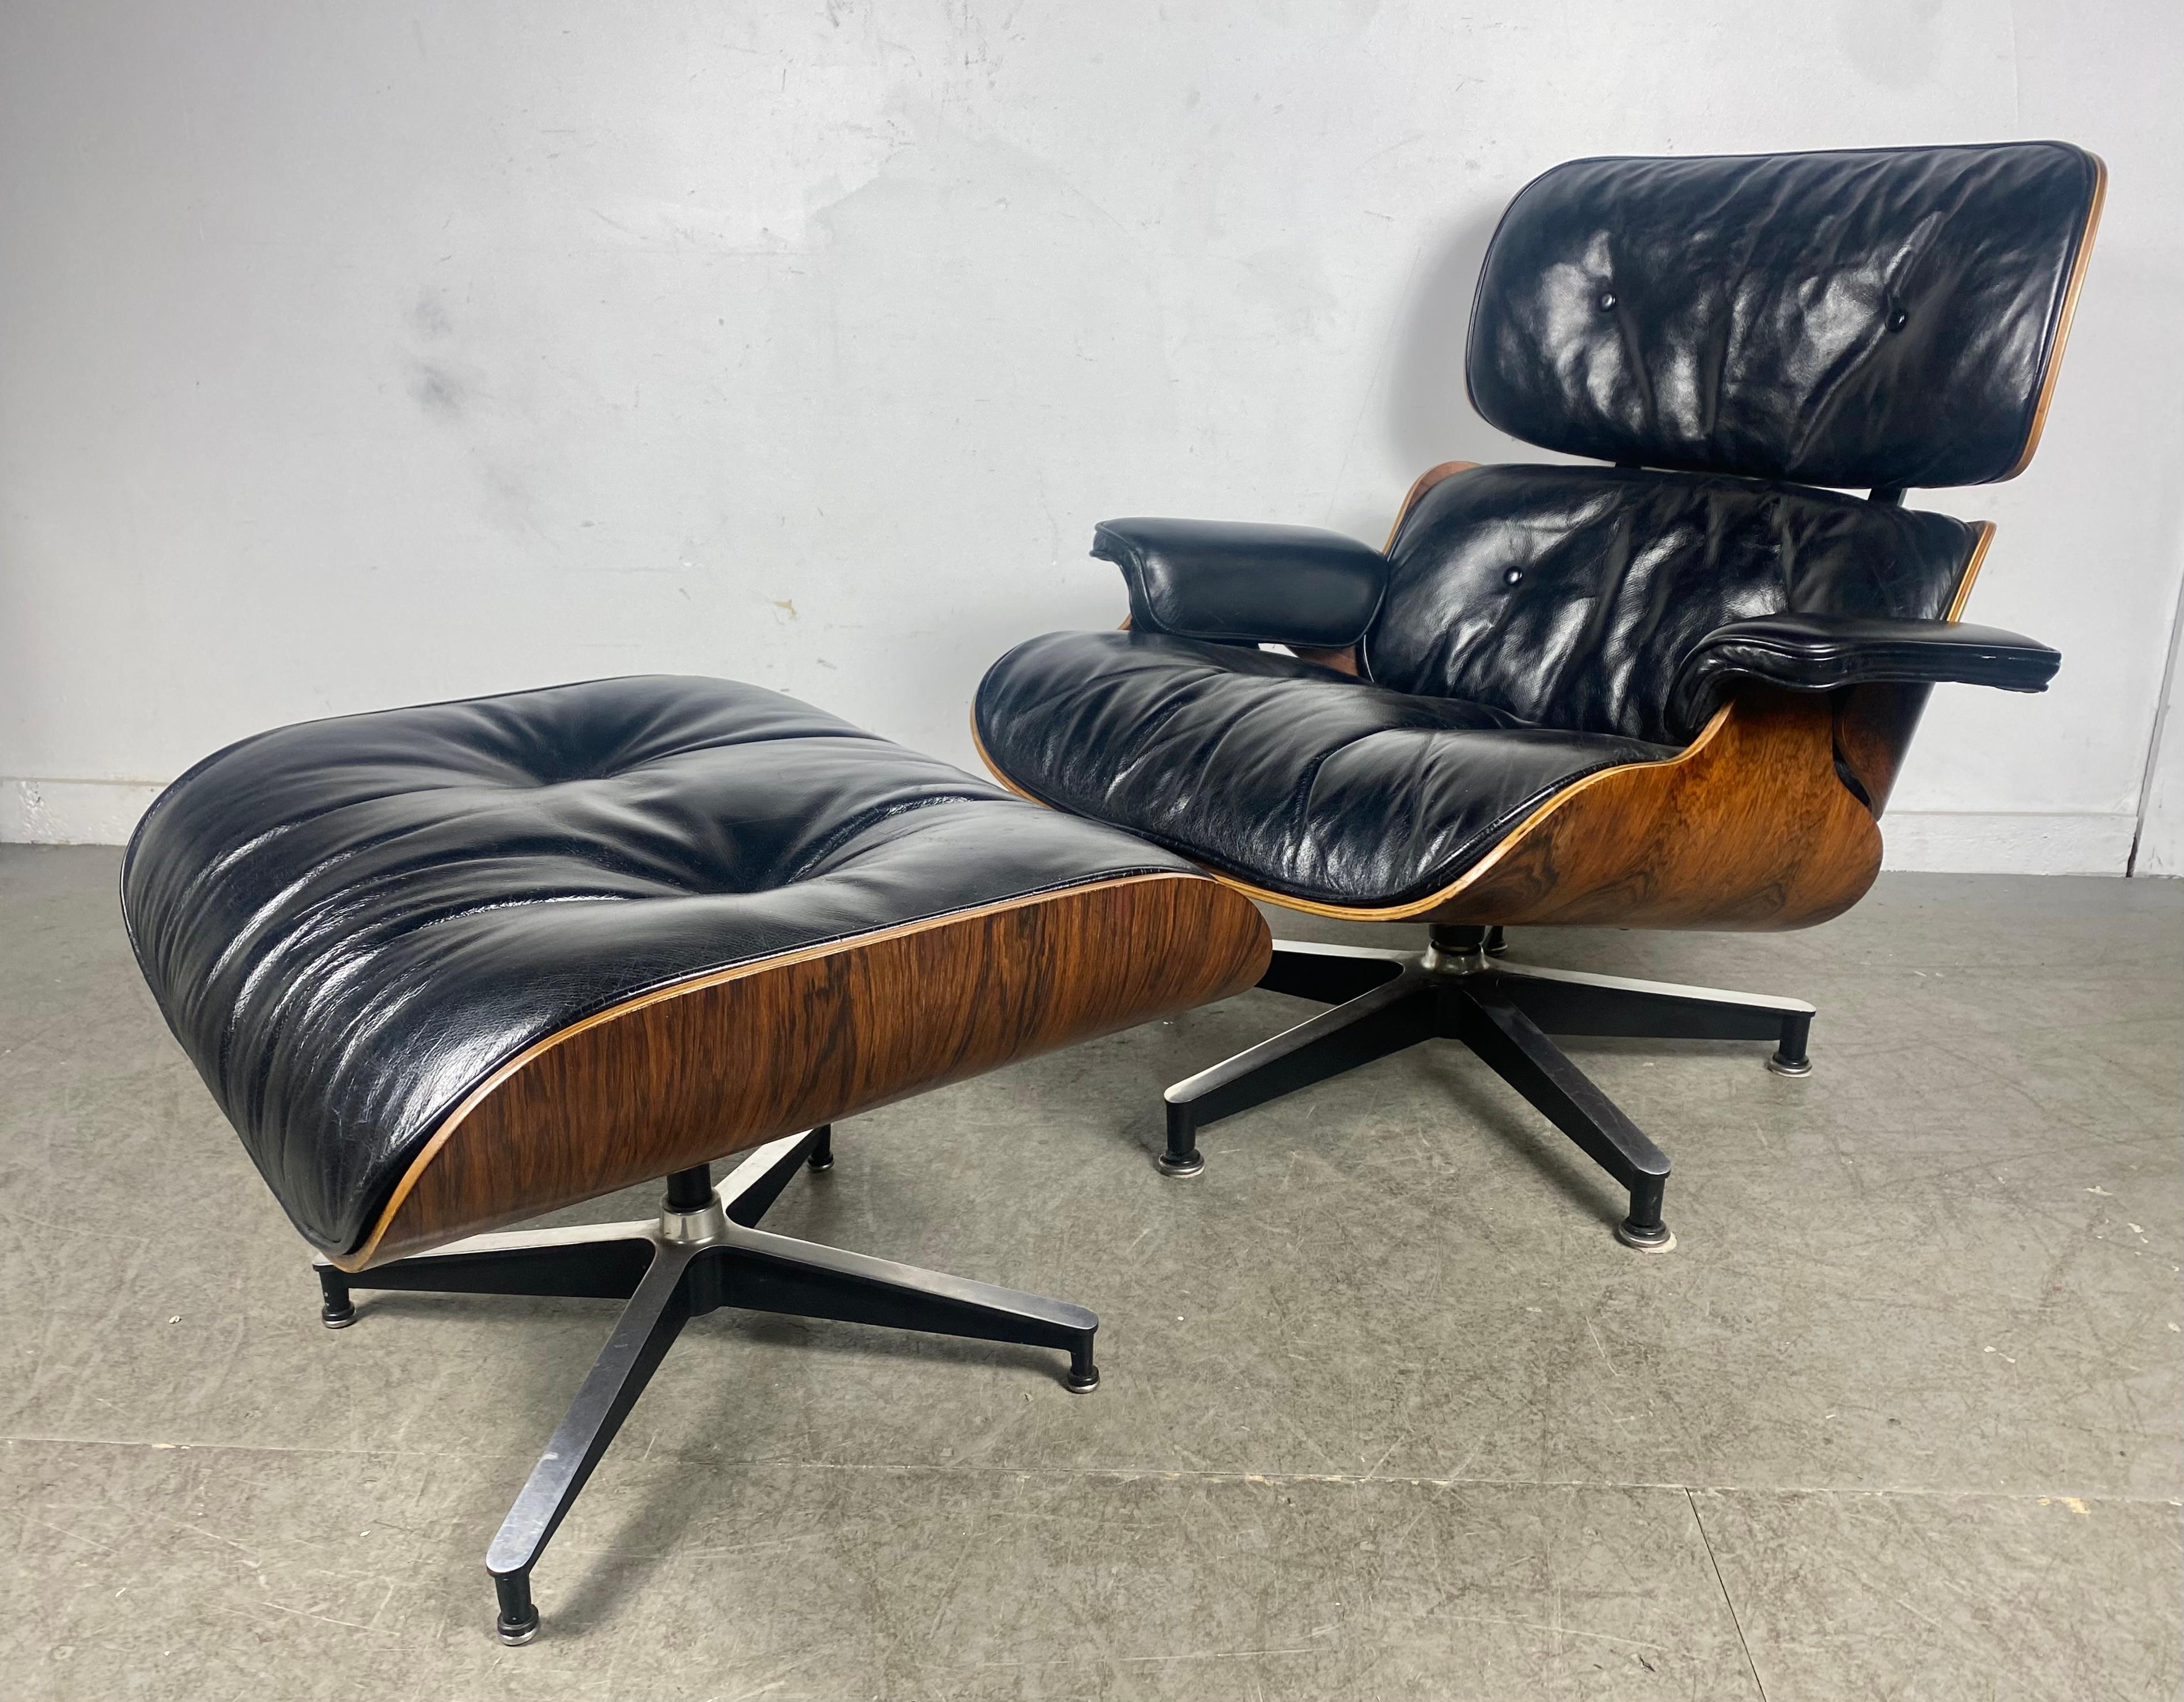 Aluminum Rare 2nd Generation Rosewood, Leather Lounge Chair and Ottoman by Charles Eames For Sale